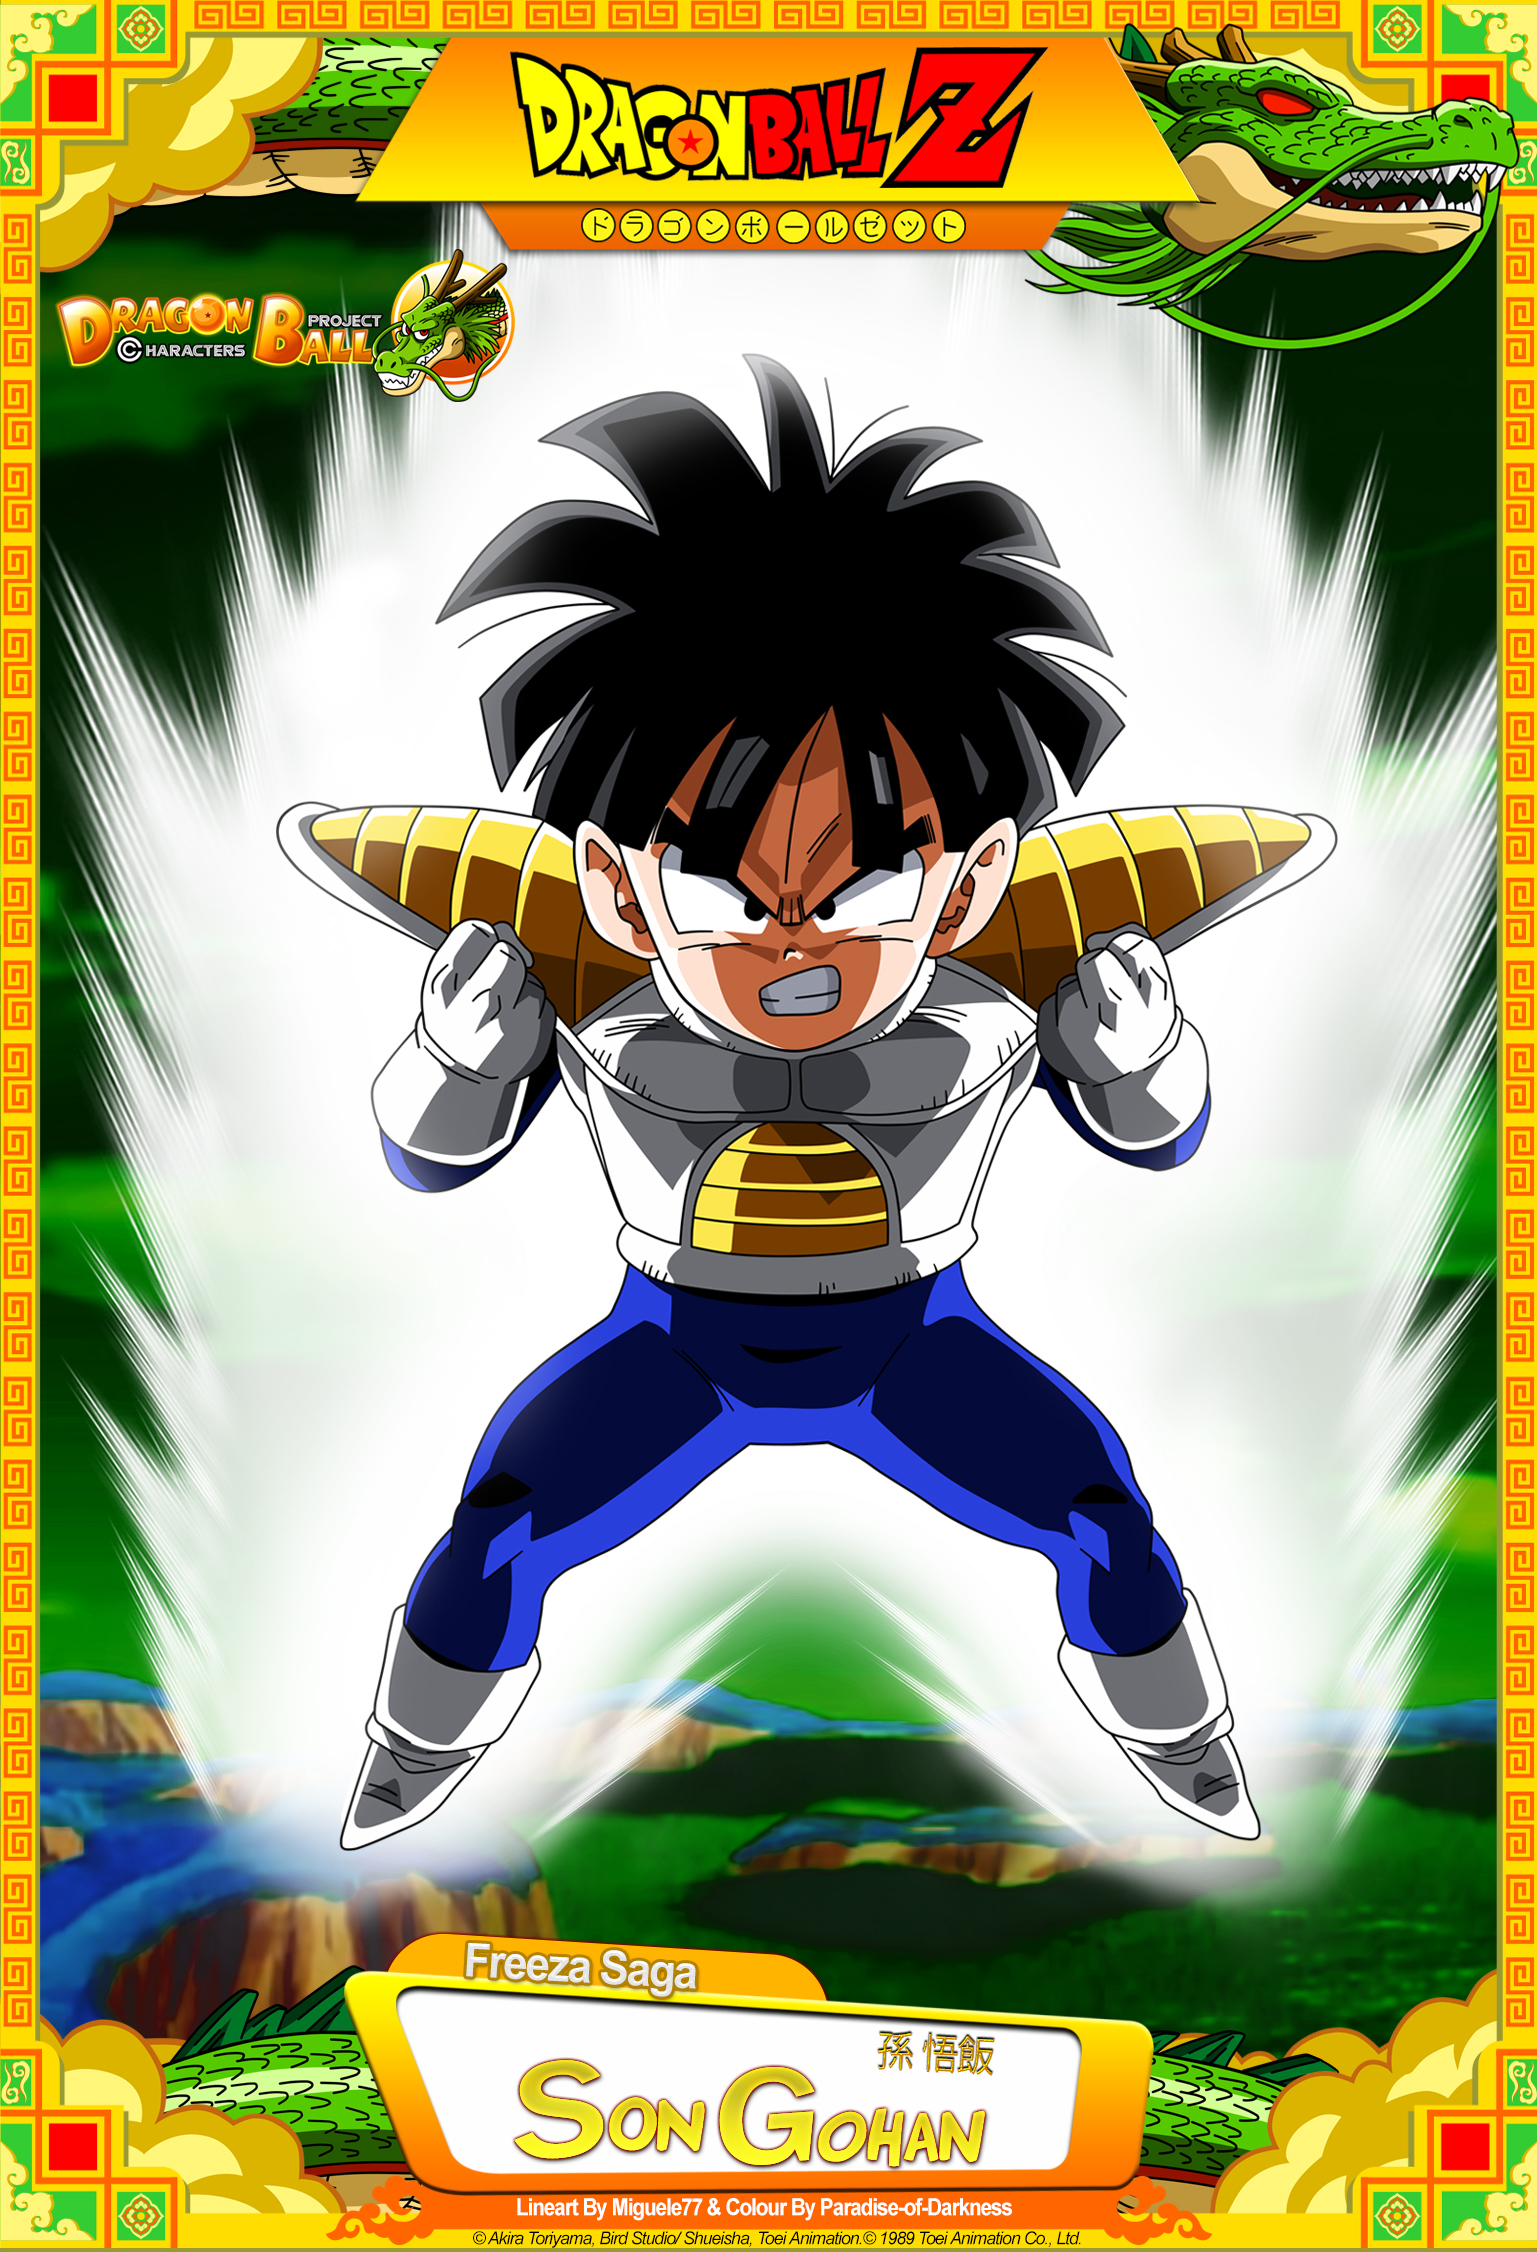 Dragon Ball GT - Vegeta by DBCProject on DeviantArt